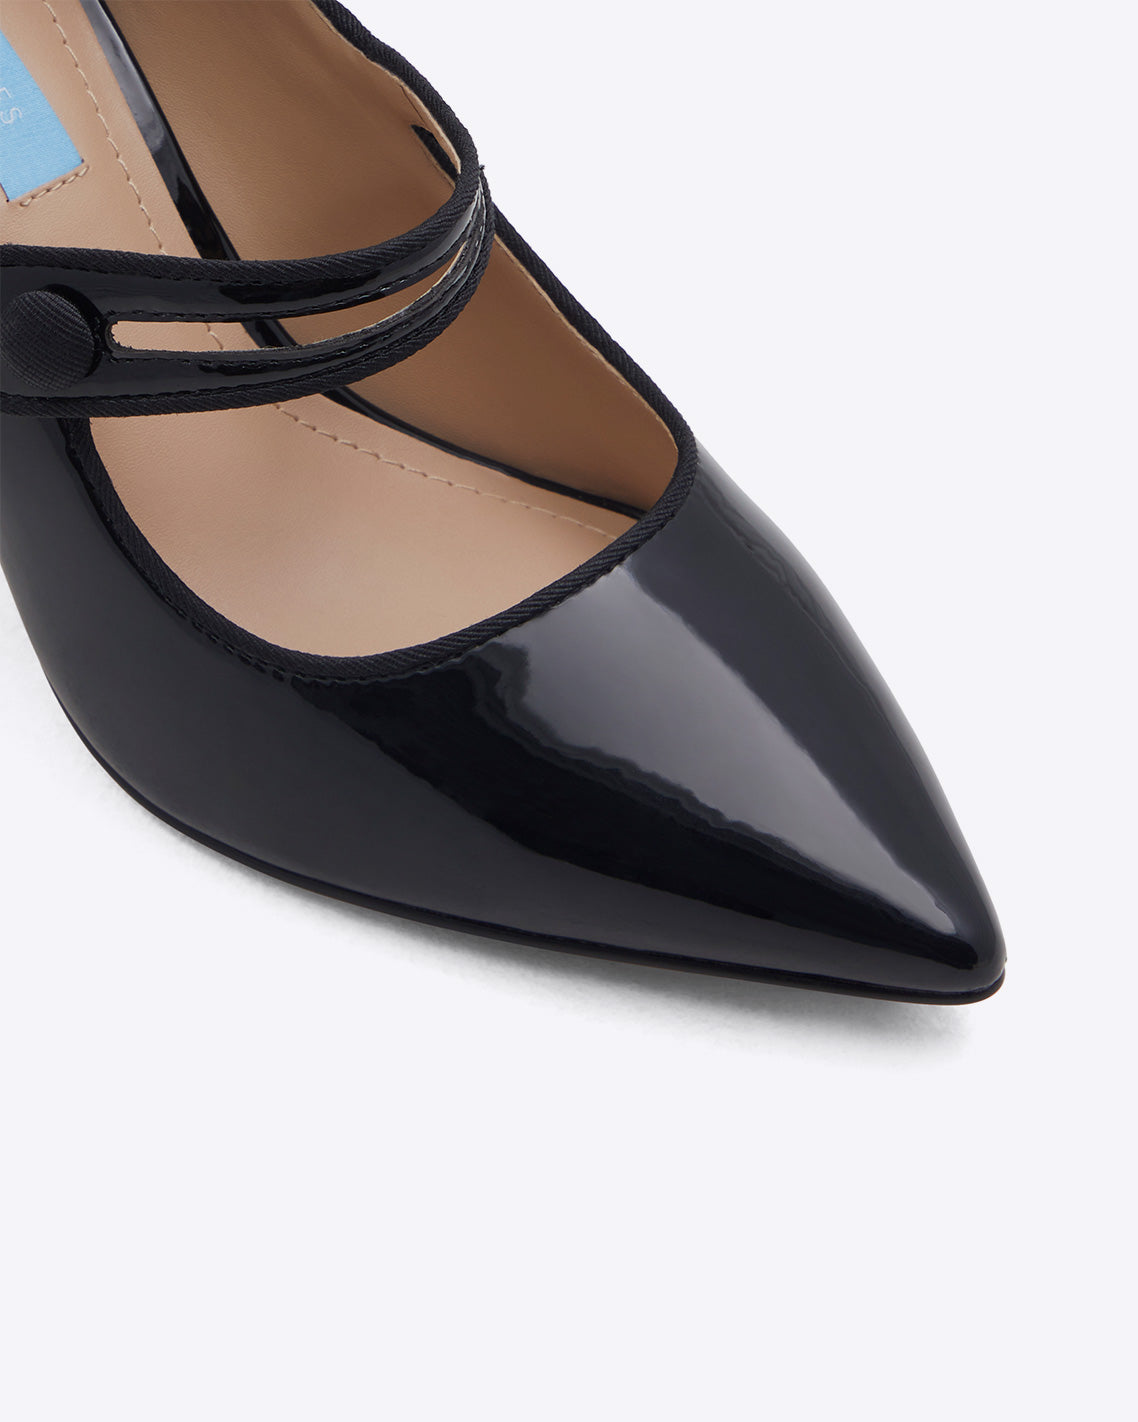 Mary Jane in Black Patent Leather